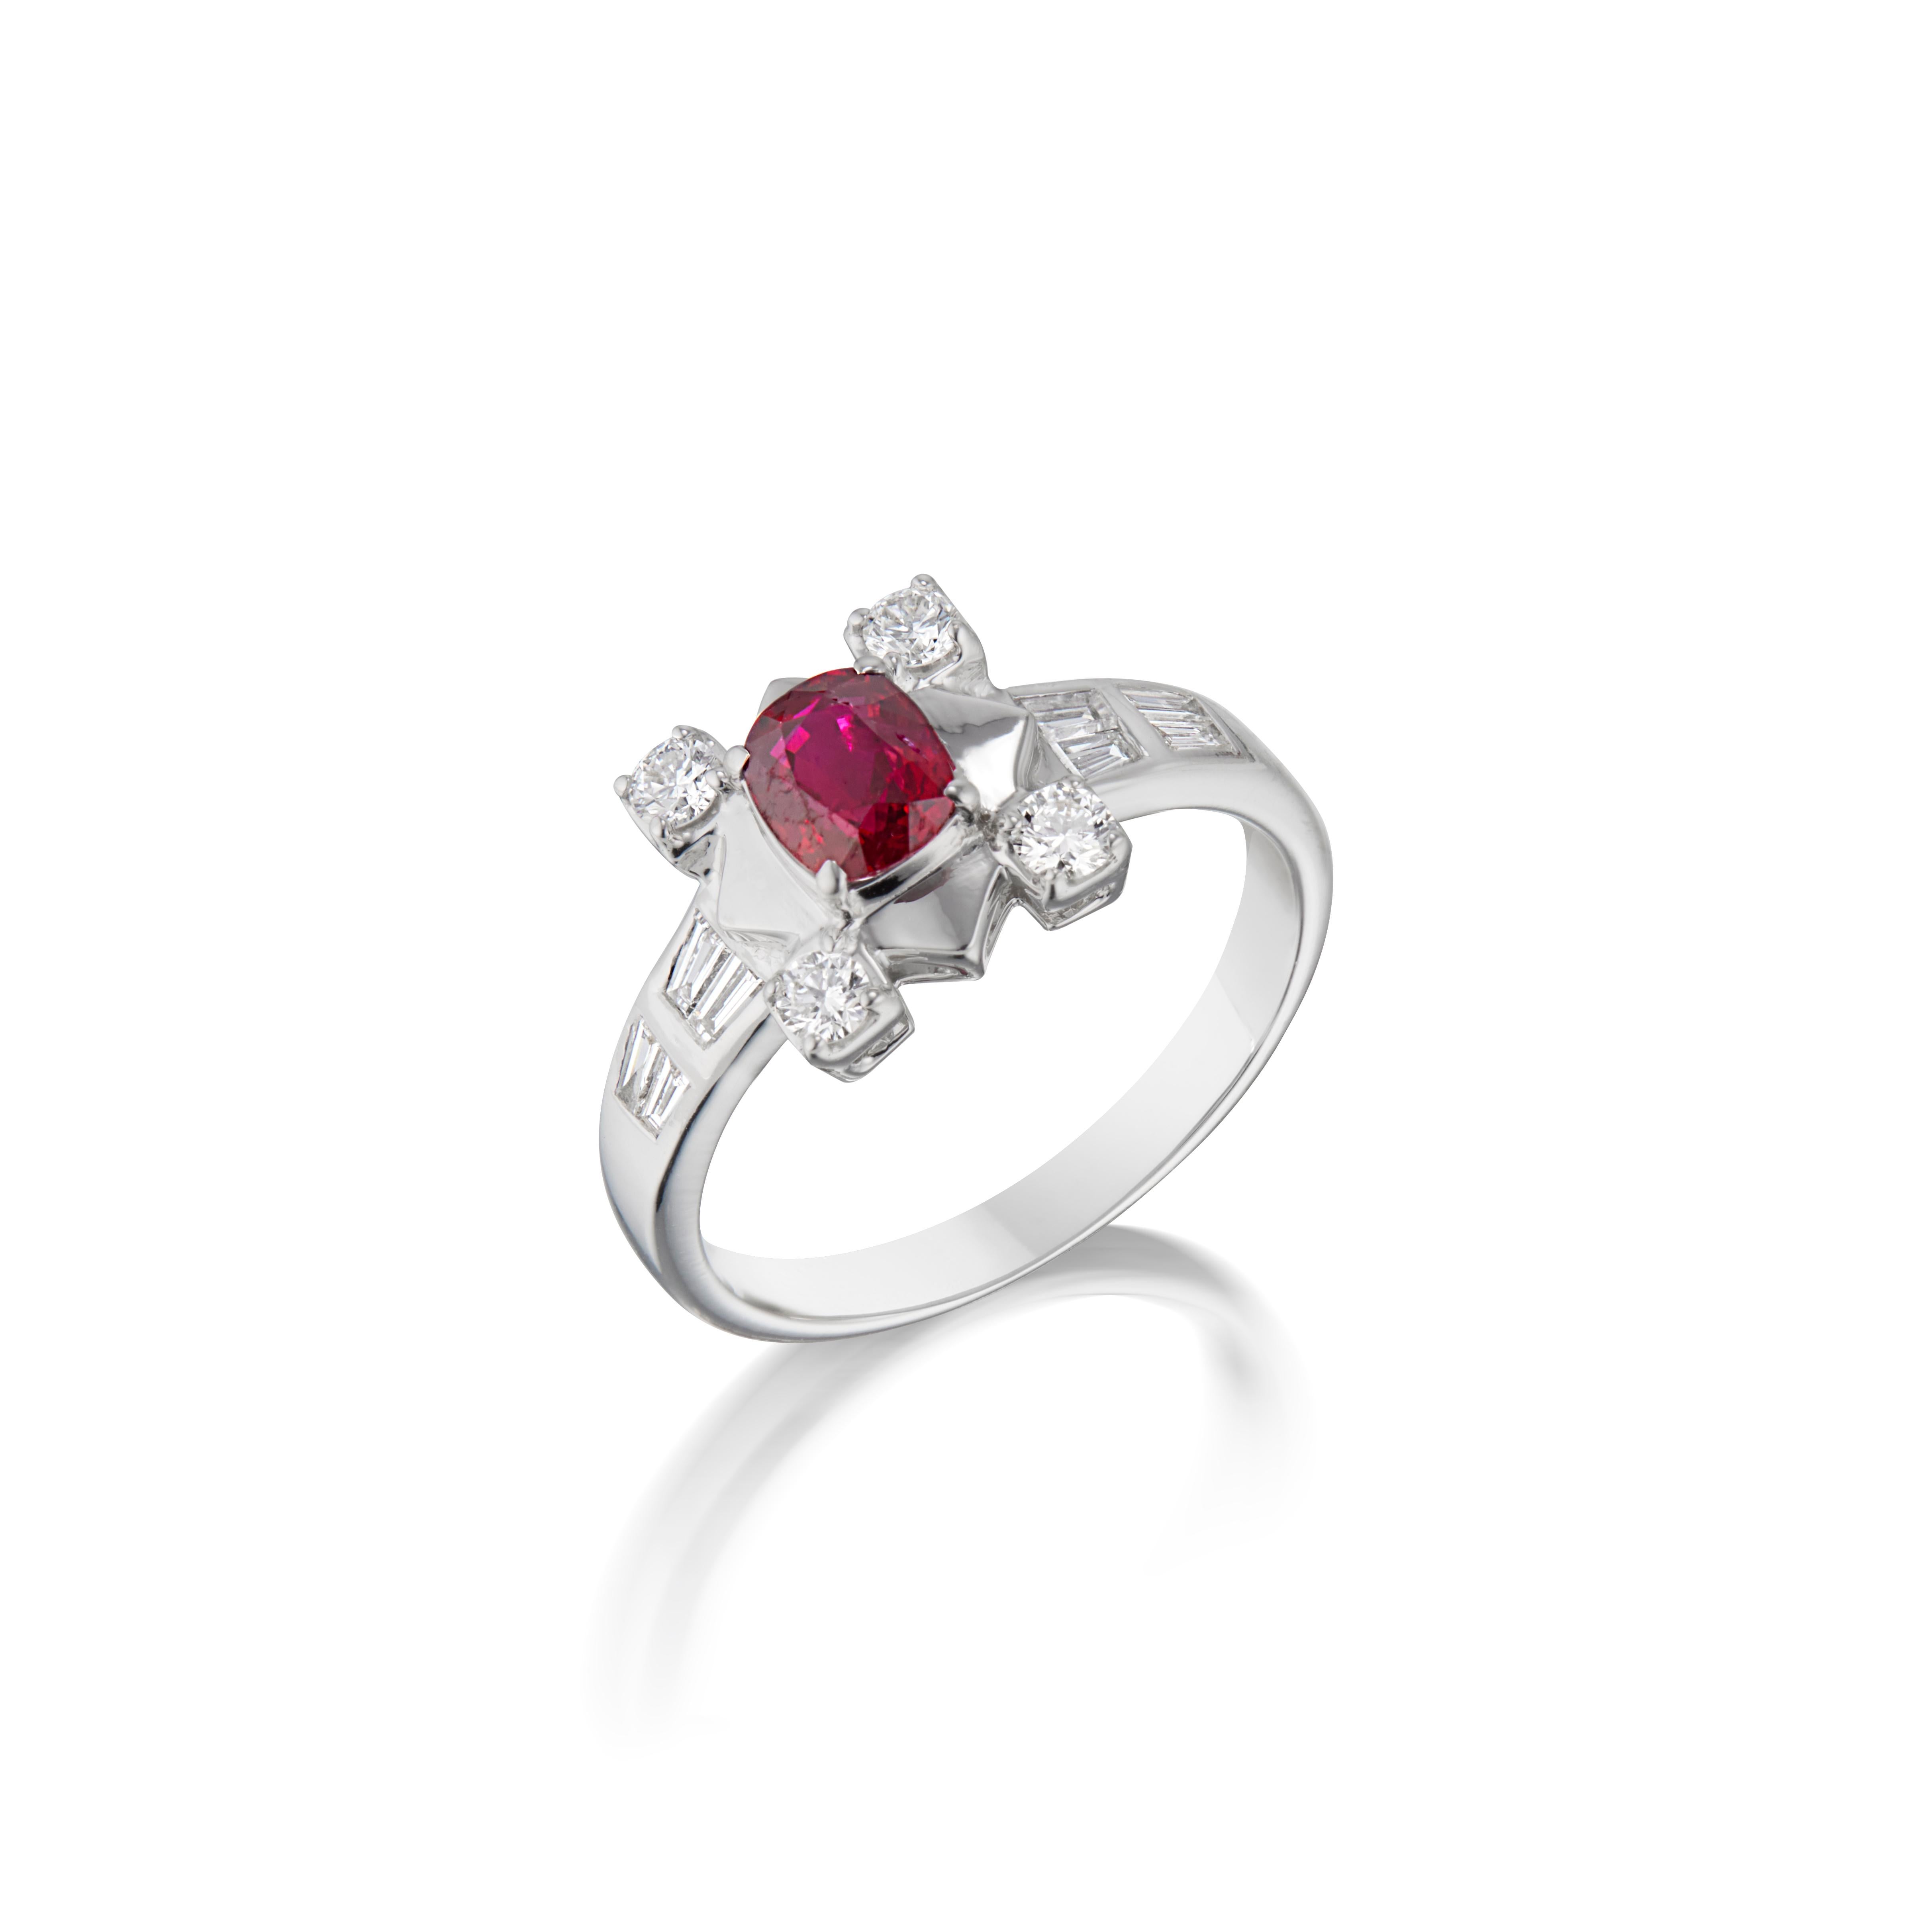 18K WHITE GOLD 
4 ROUND DIAMONDS, 0.25 CARATS
8 TAPERED DIAMONDS, 0.25 CARATS
1 NO-HEAT BURMESE RUBY, 0.82 CARATS
GUBELIN LAB CERTIFIED, Red

Introducing our exquisite unisex ring with a unique design. This captivating piece features a stunning 0.82